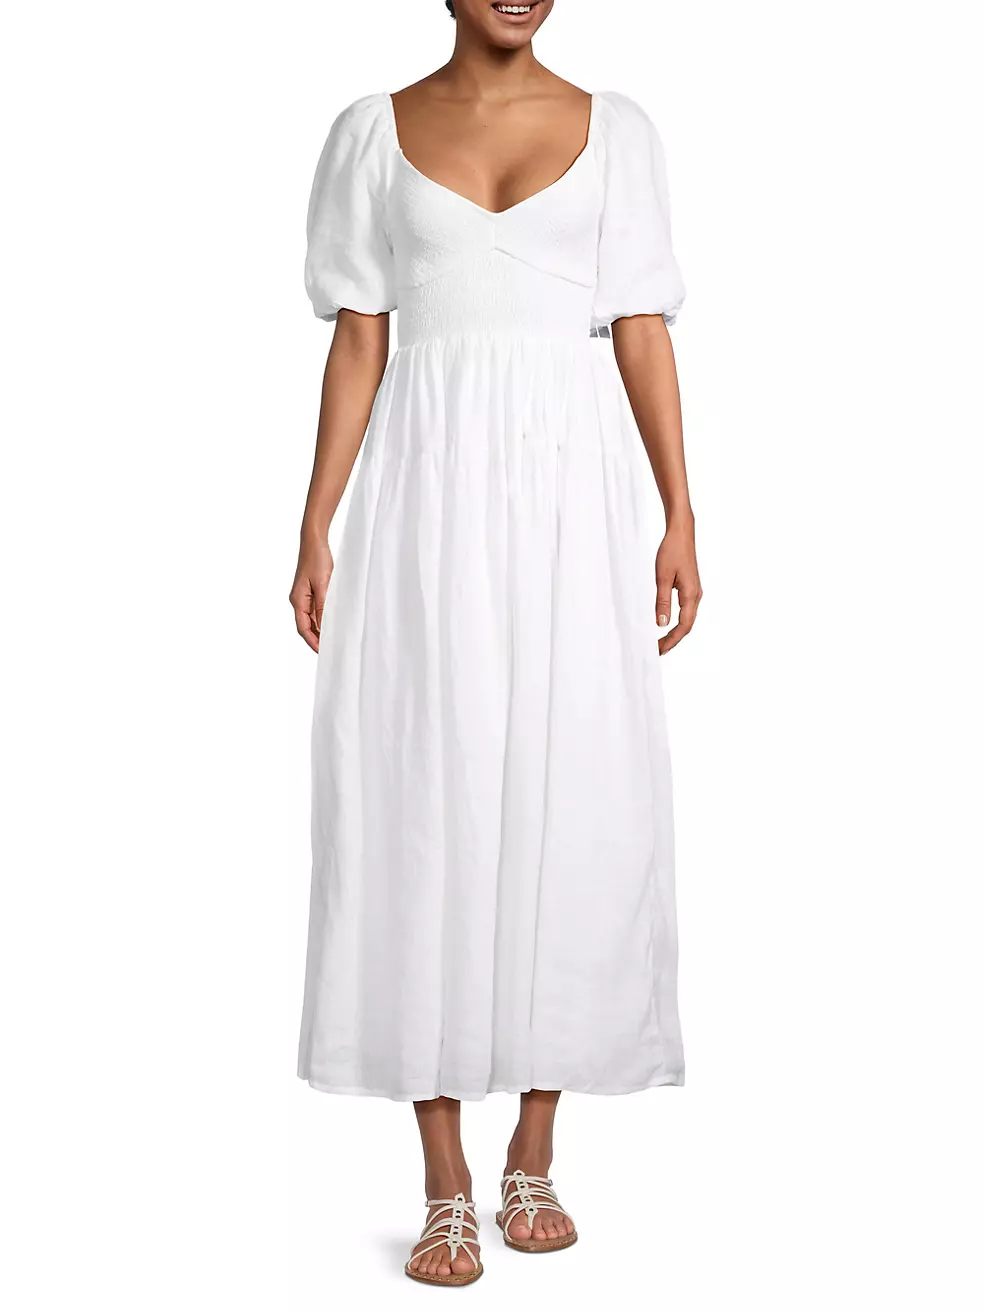 Discover the epitome of summer elegance with our guide to the best white summer dresses. From breezy linens to elegant midi styles, find a perfect dress for any occasion, ensuring comfort and chic all season long. White Summer Dress | White Summer Dresses | Summer Dress | White Summer Dress Long | White Summer Dresses Long | White Dress | Sundress | Beach Dress | White Outfit | Casual Dress | Sun Dress | White Mini Dress | Boho Dress | Sundress | Cute Dress | Long Dress | Vacation | Short Dress